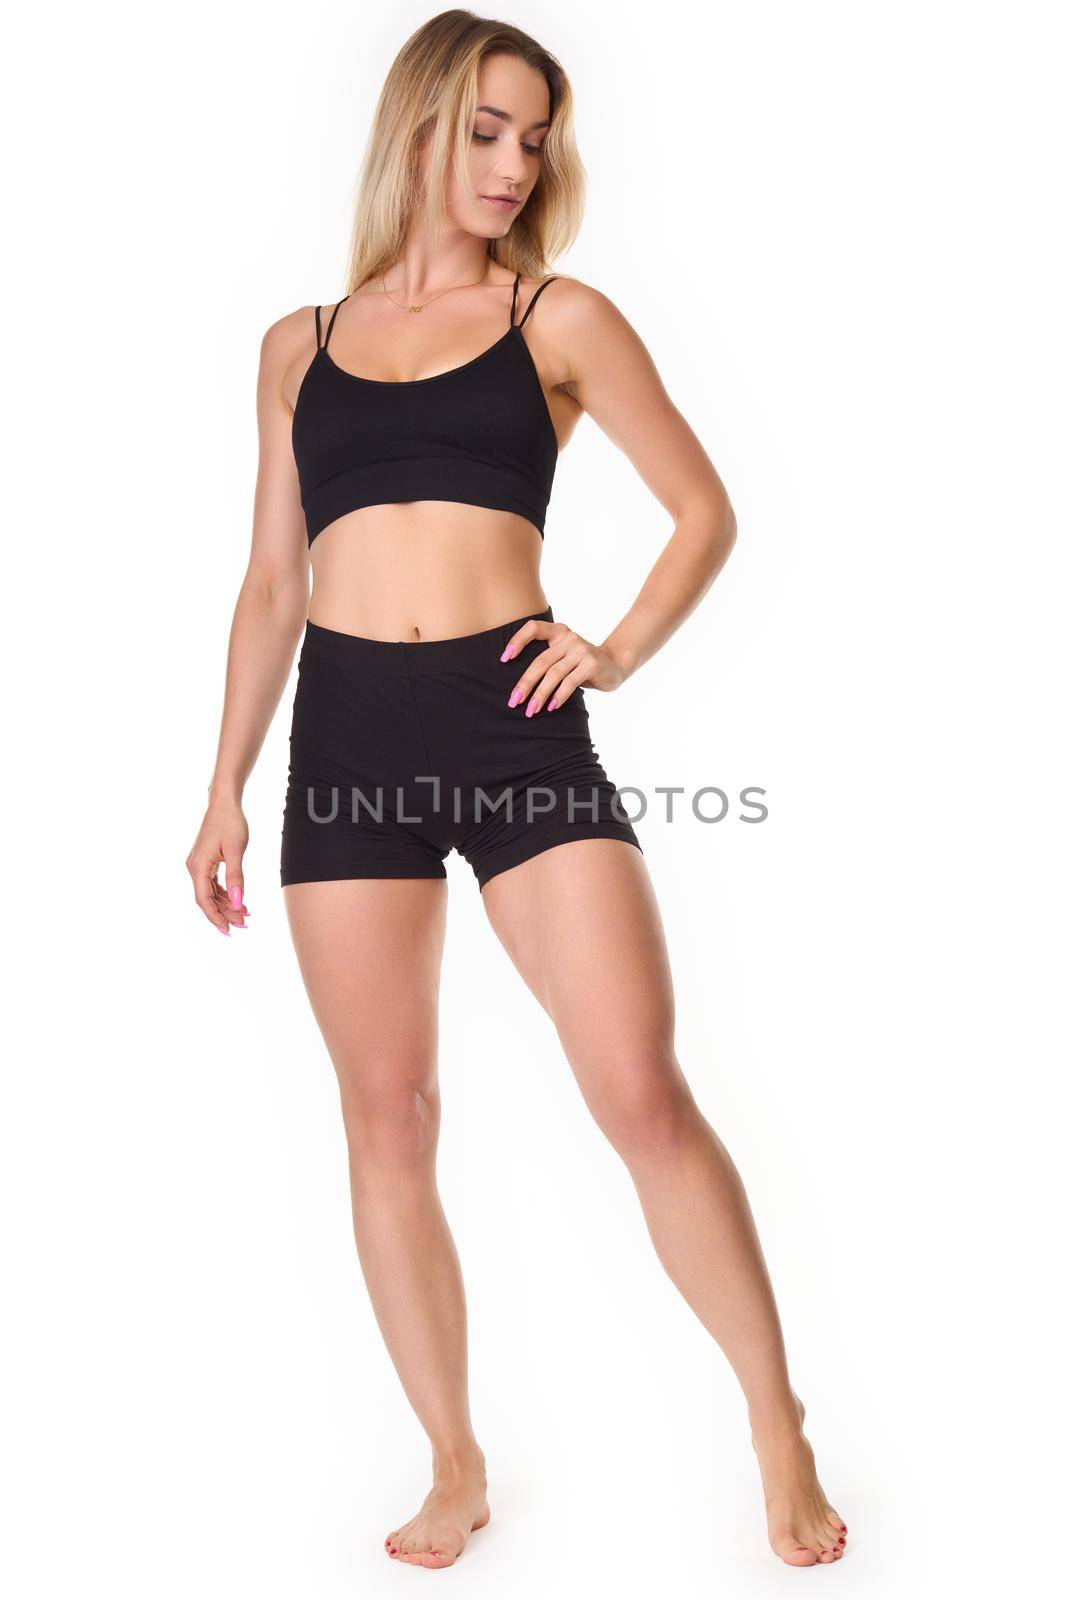 A young woman posing in a sports outfit on a white background by Jarosz